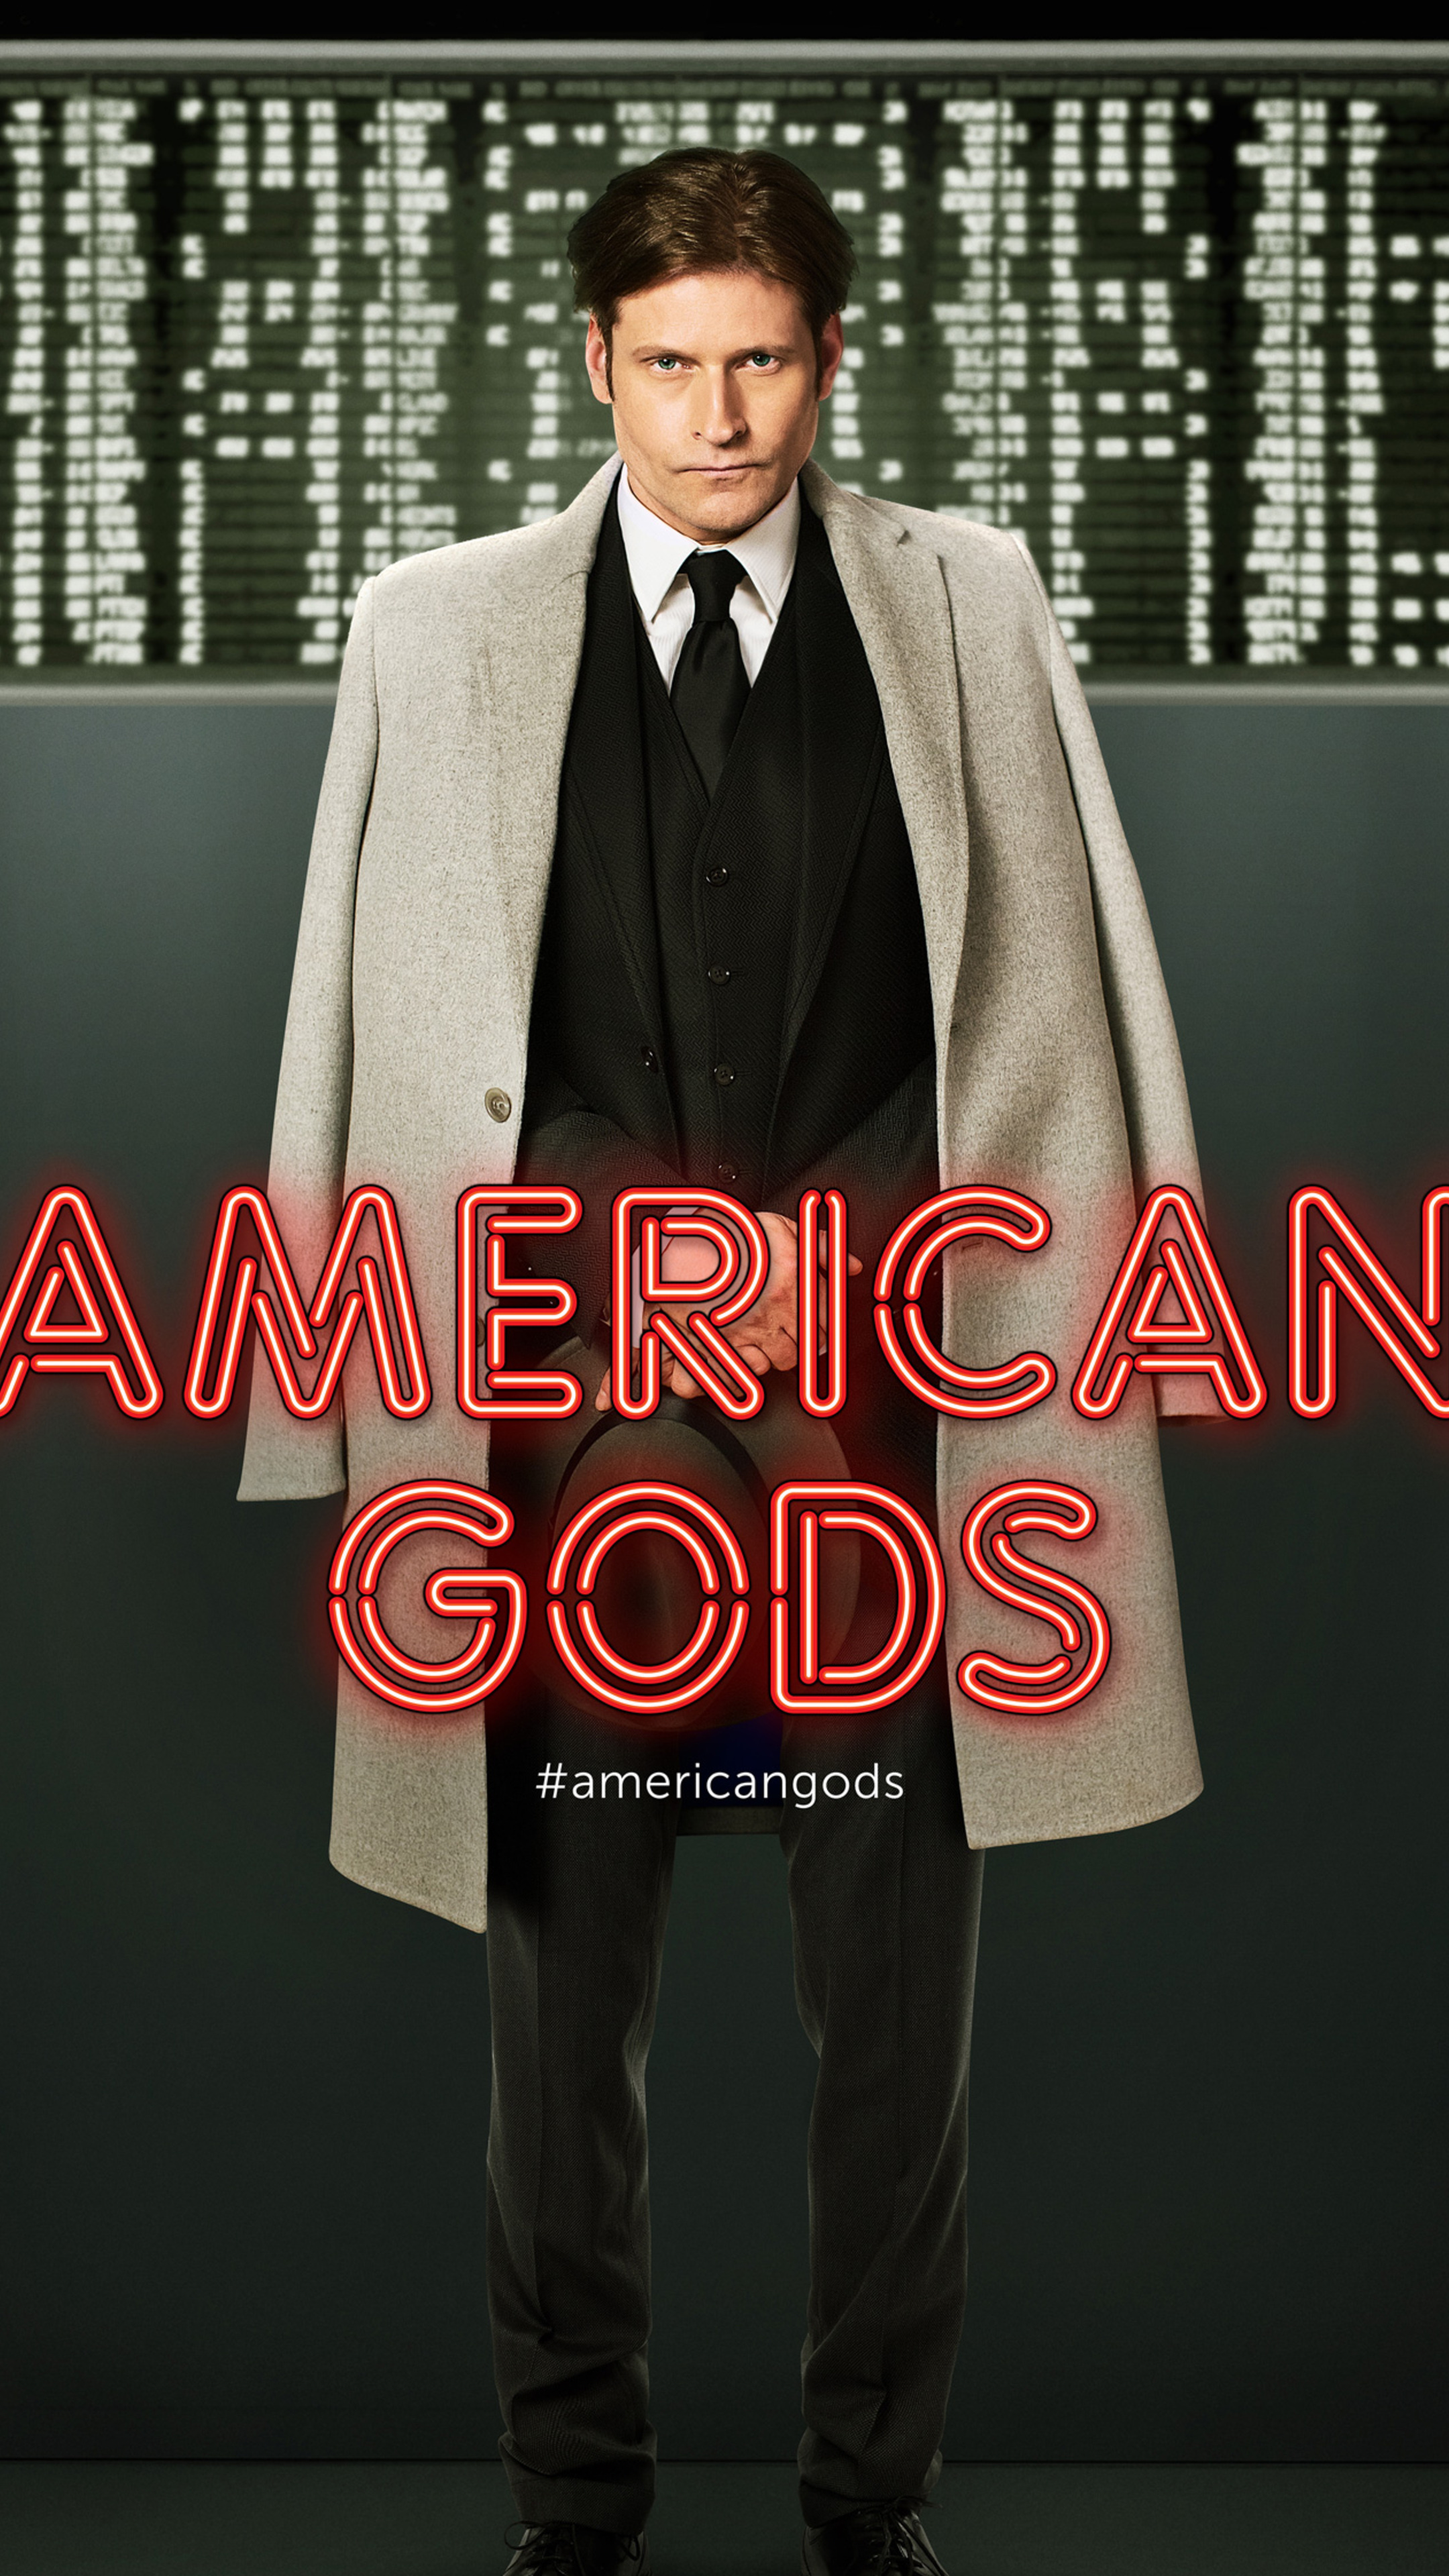 Crispin Glover as Mr. World, American Gods, Sony Xperia wallpapers, HD 4K images, 2160x3840 4K Phone